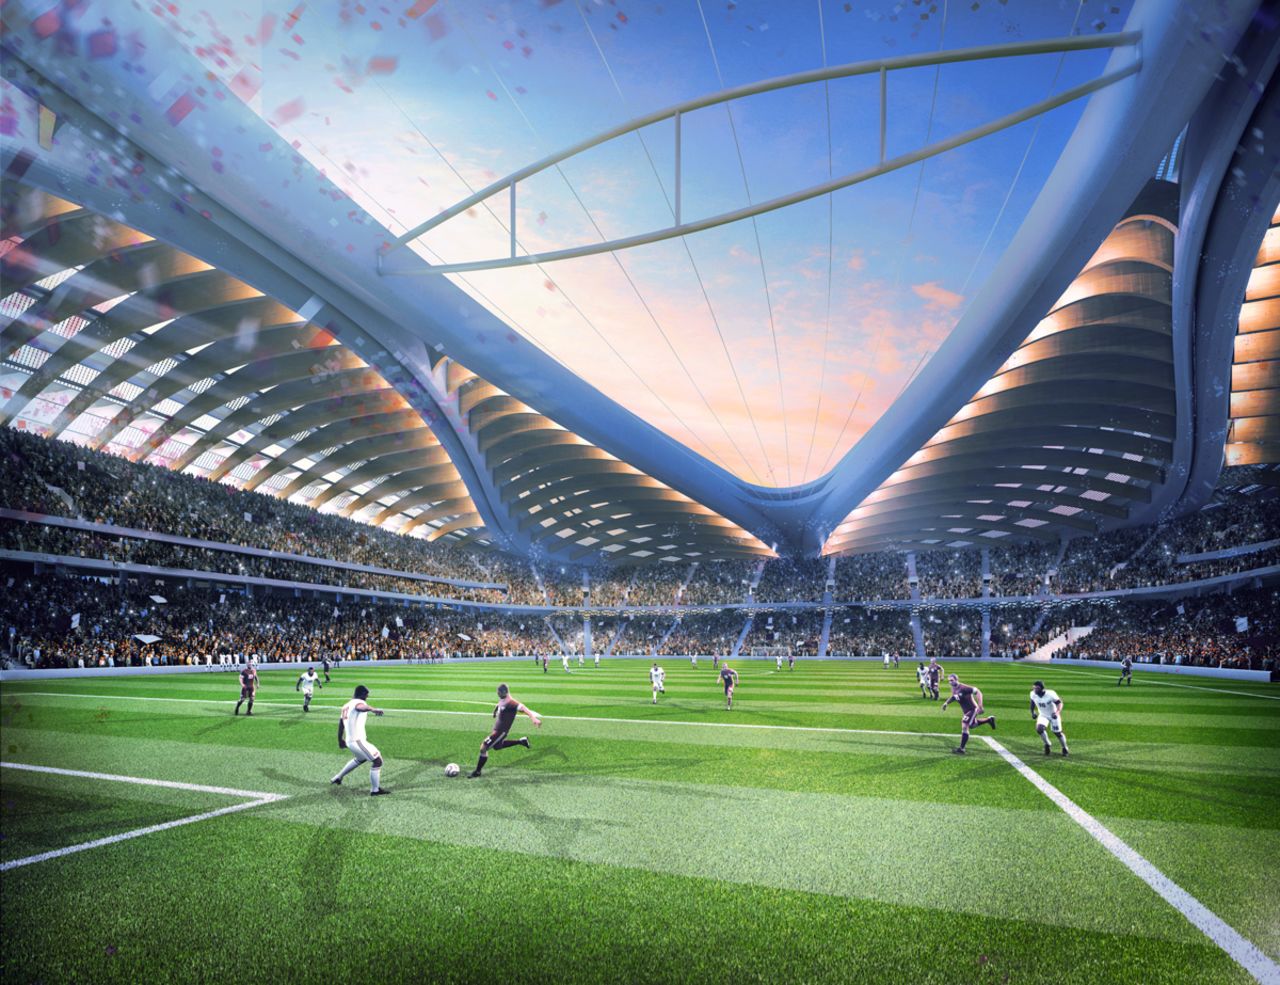 Situated a short distance outside Doha, the Al-Wakrah Stadium was designed by Zaha Hadid Architects and will have a capacity of 40,000. It will also host games up until the World Cup quarterfinals.